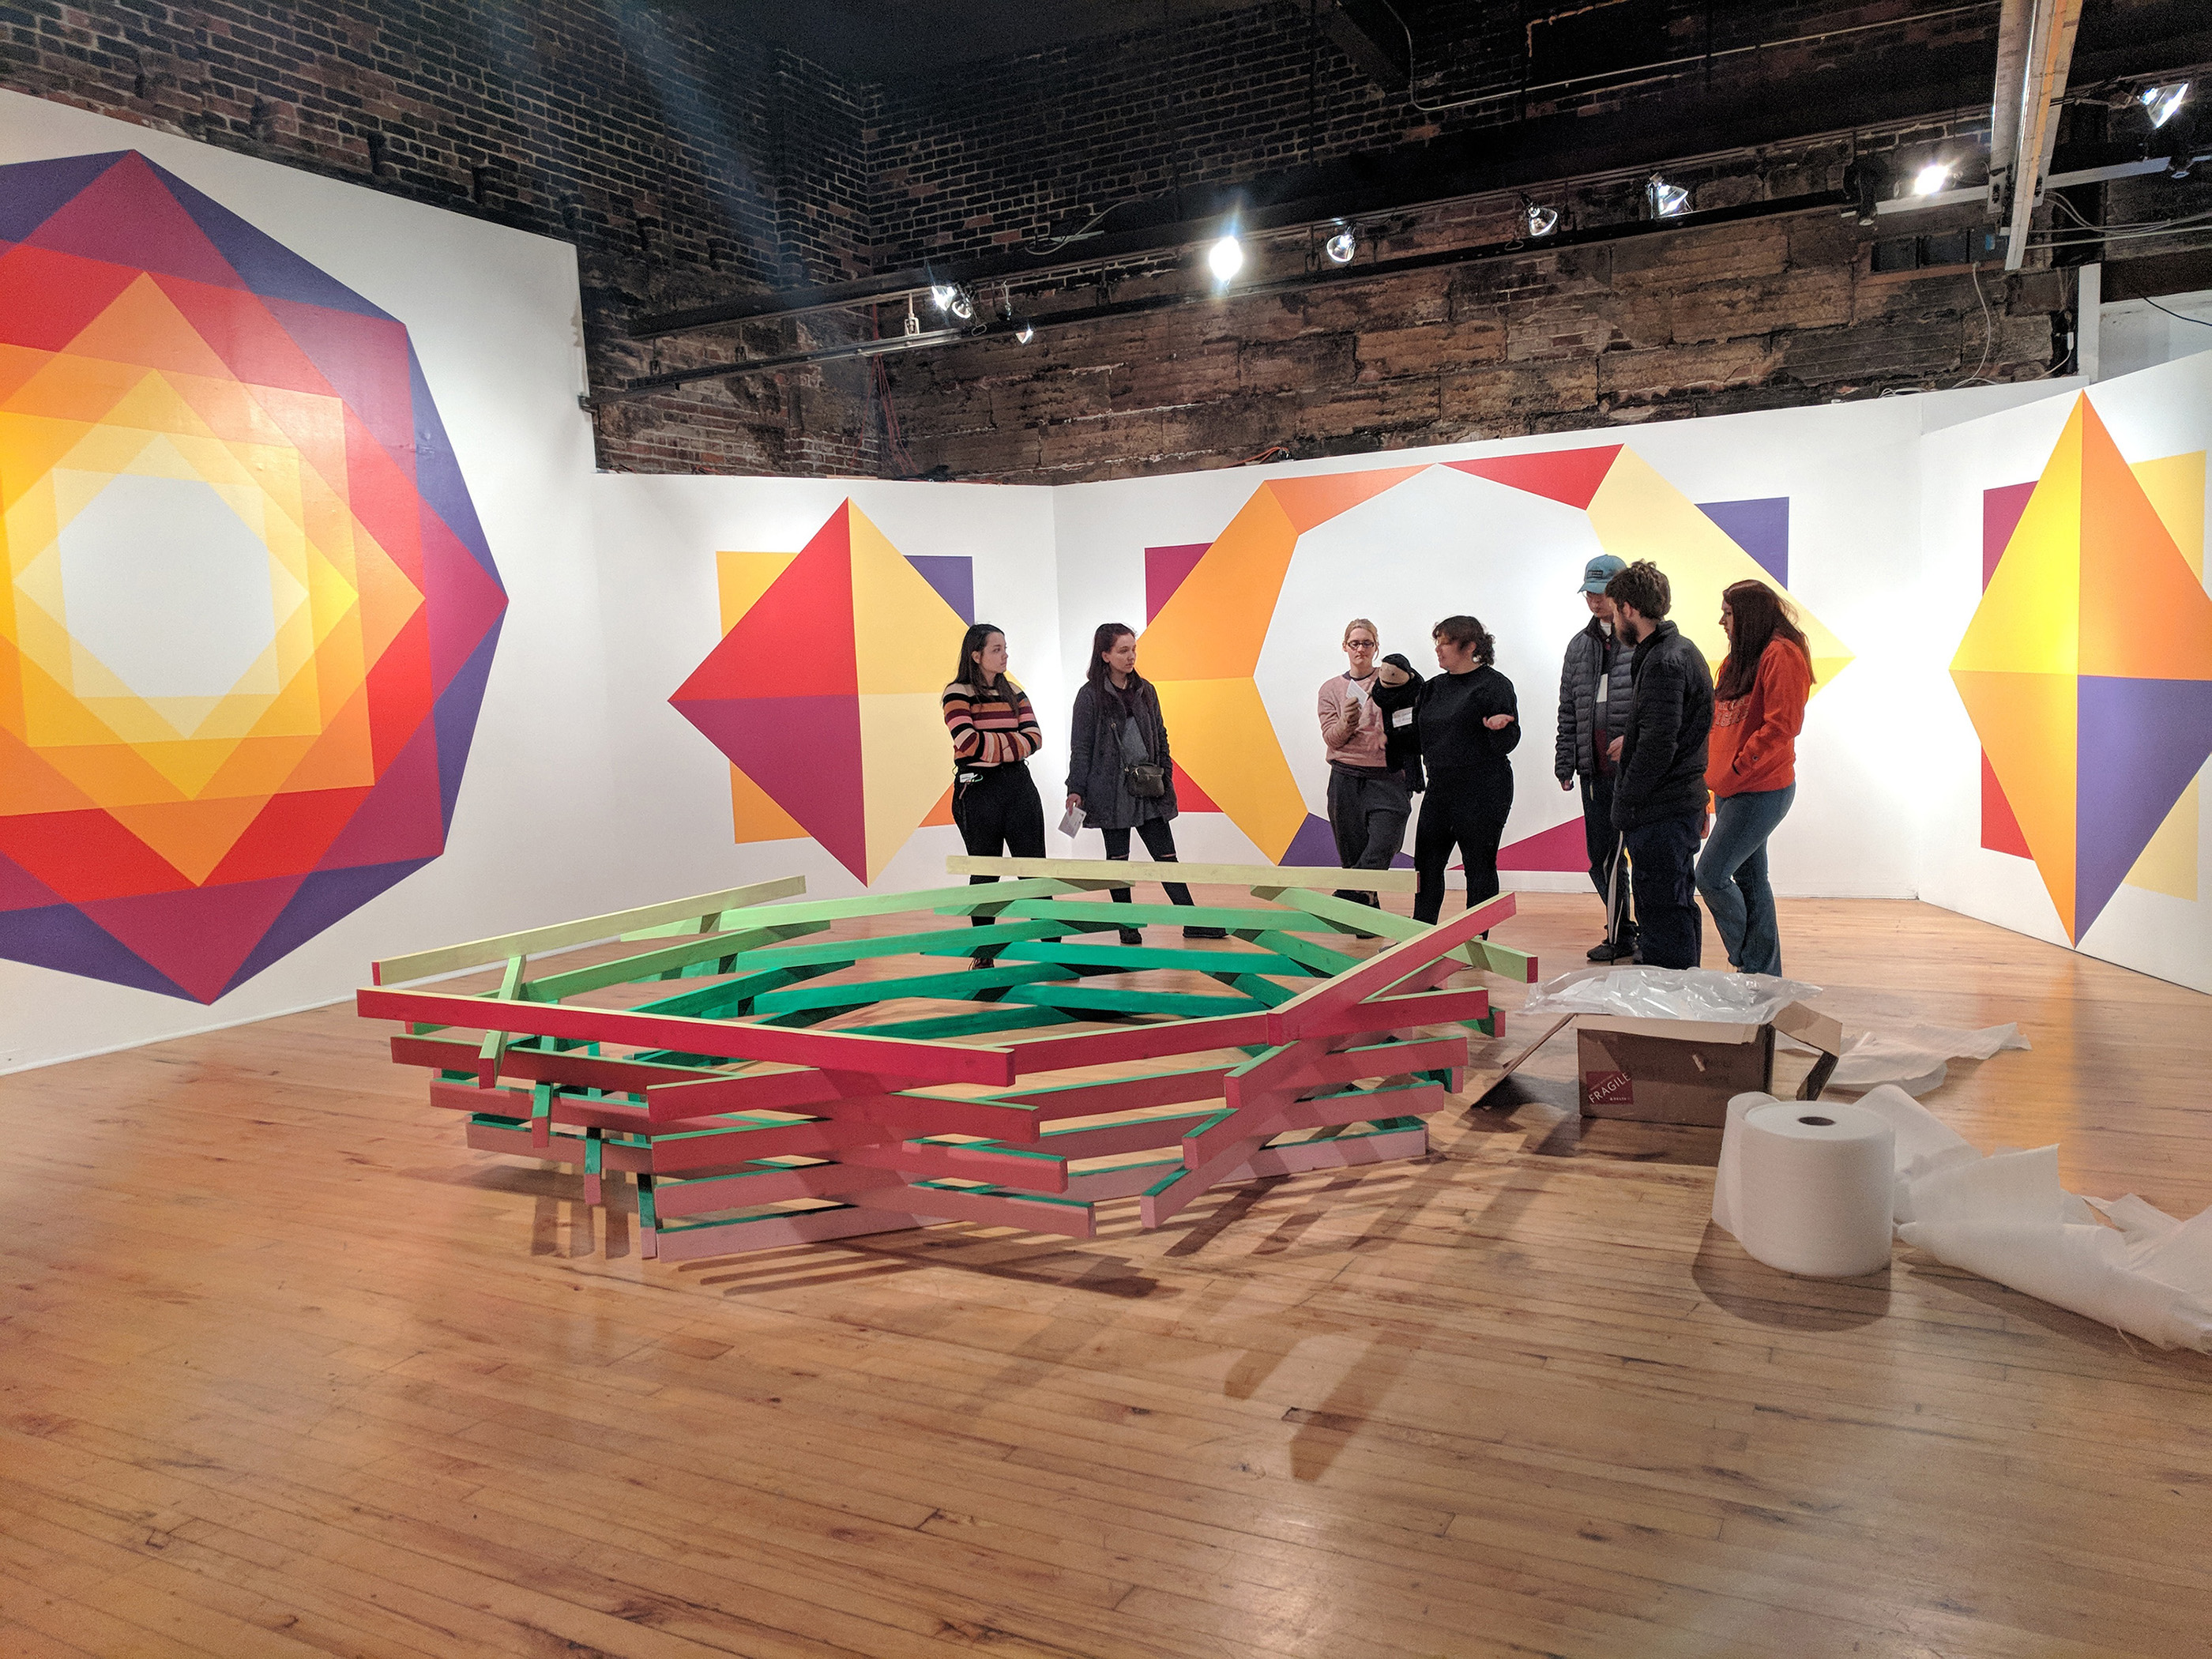 Students gather in a space with vibrant decals on the walls and an installation in the center of the room.